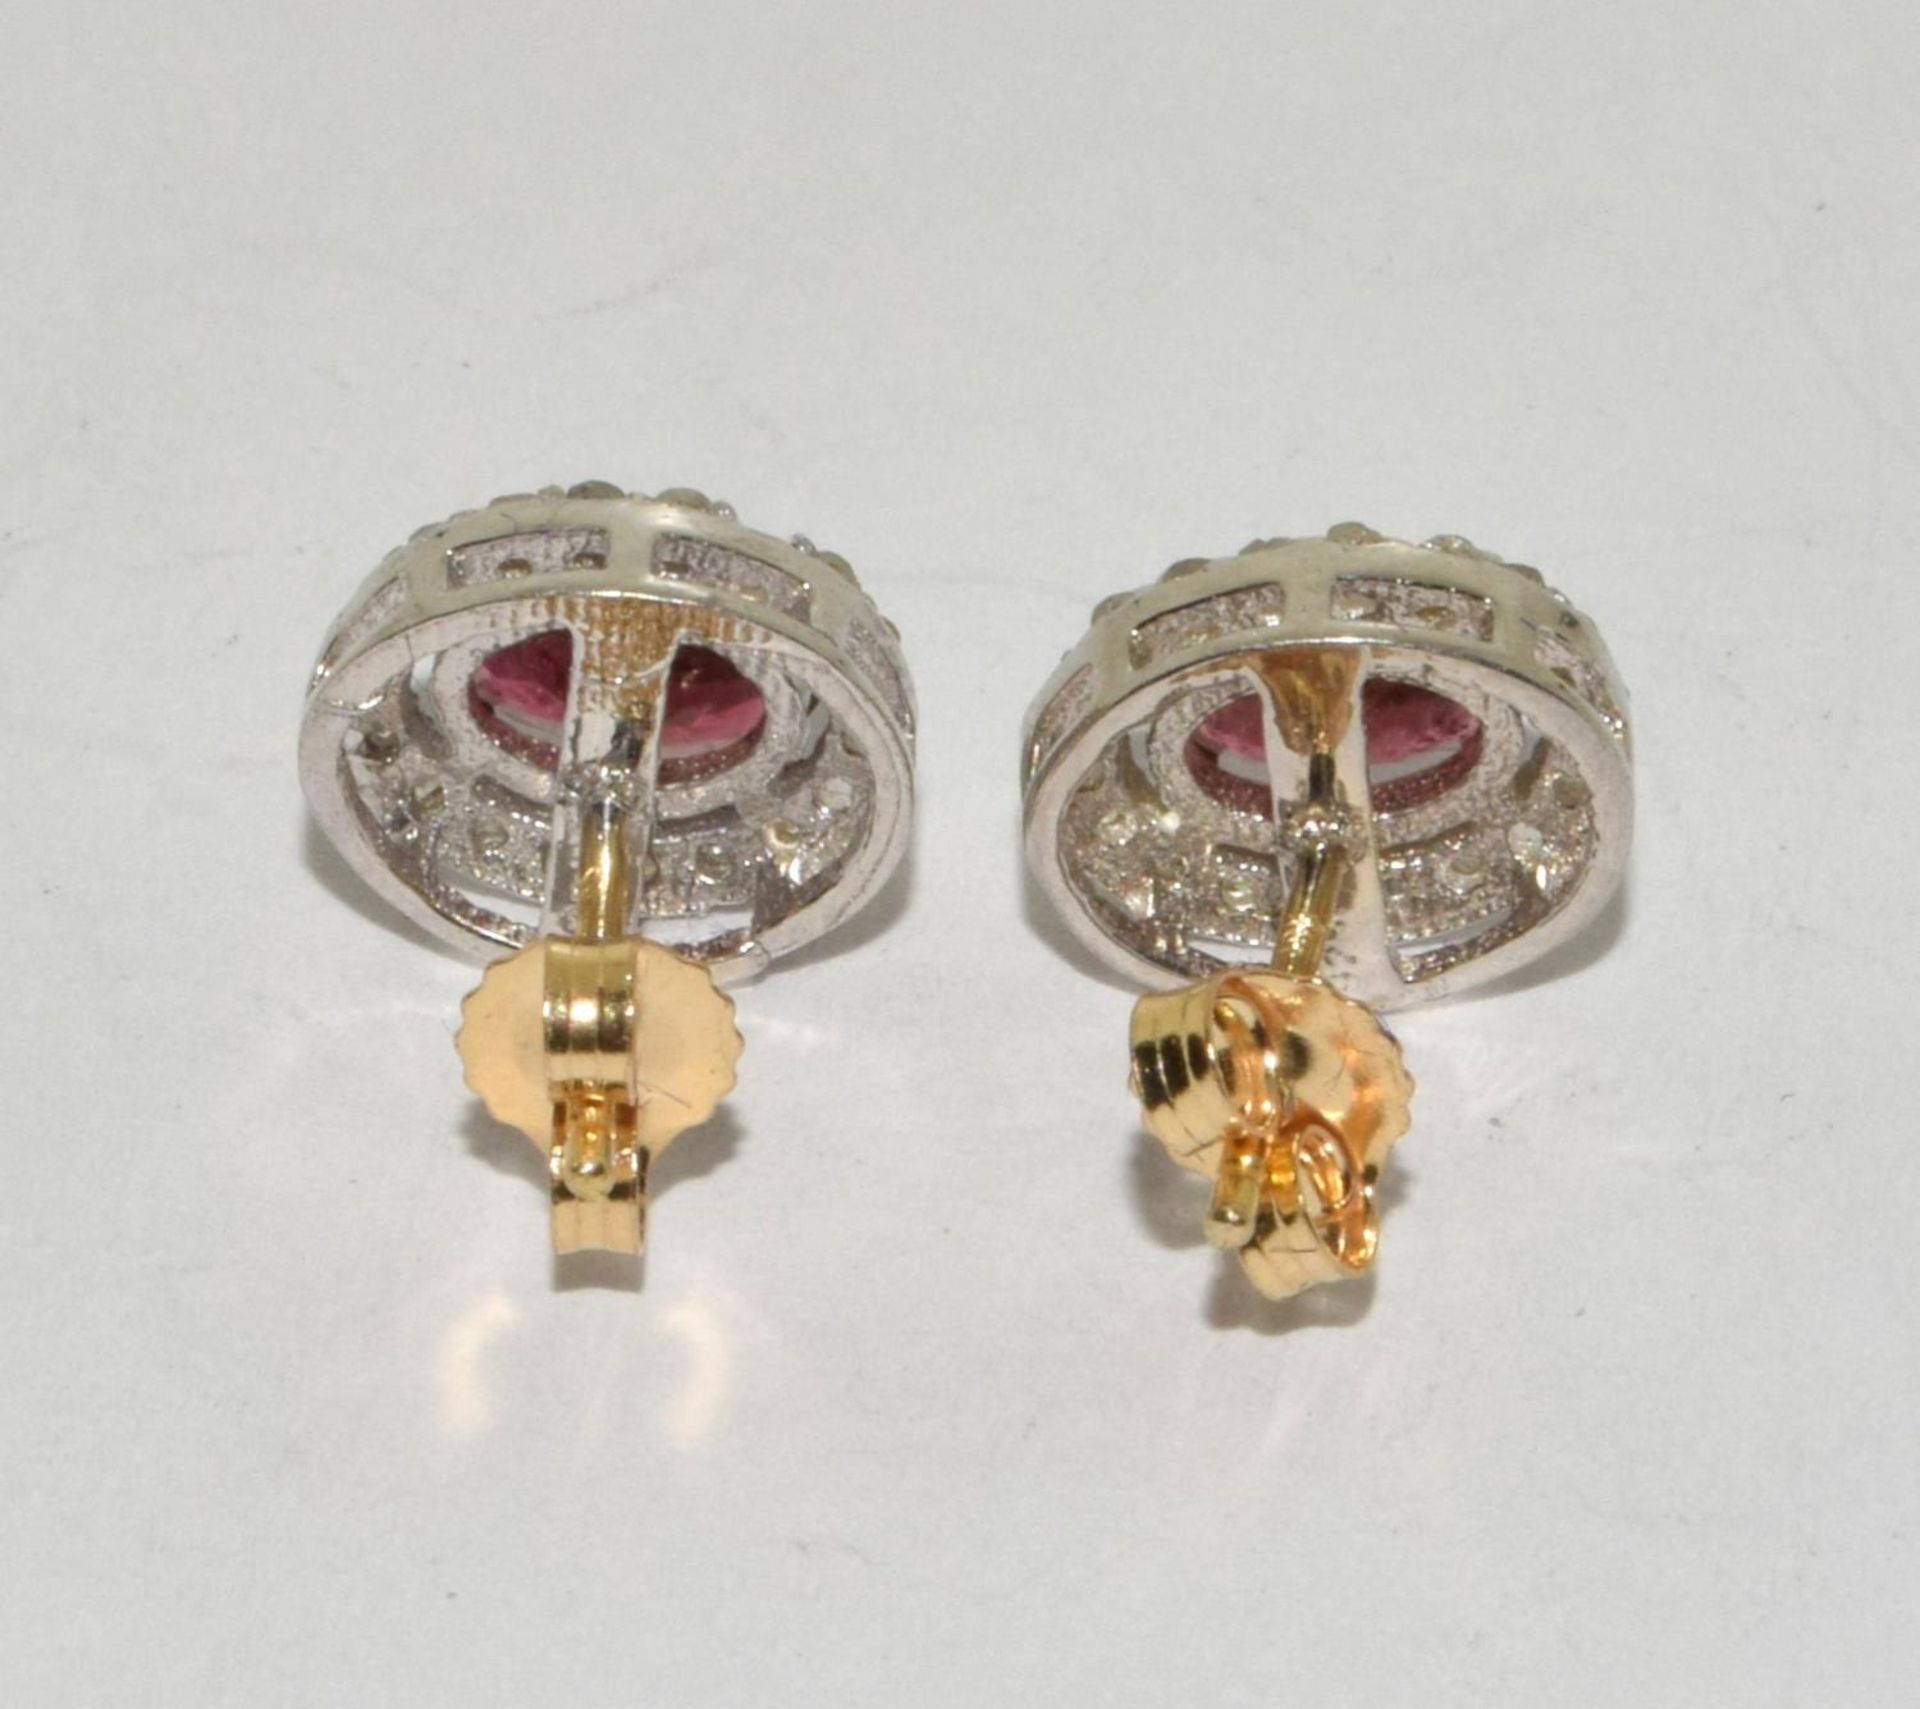 Diamond and pink tourmaline stud earrings with 18ct gold posts - Image 5 of 6